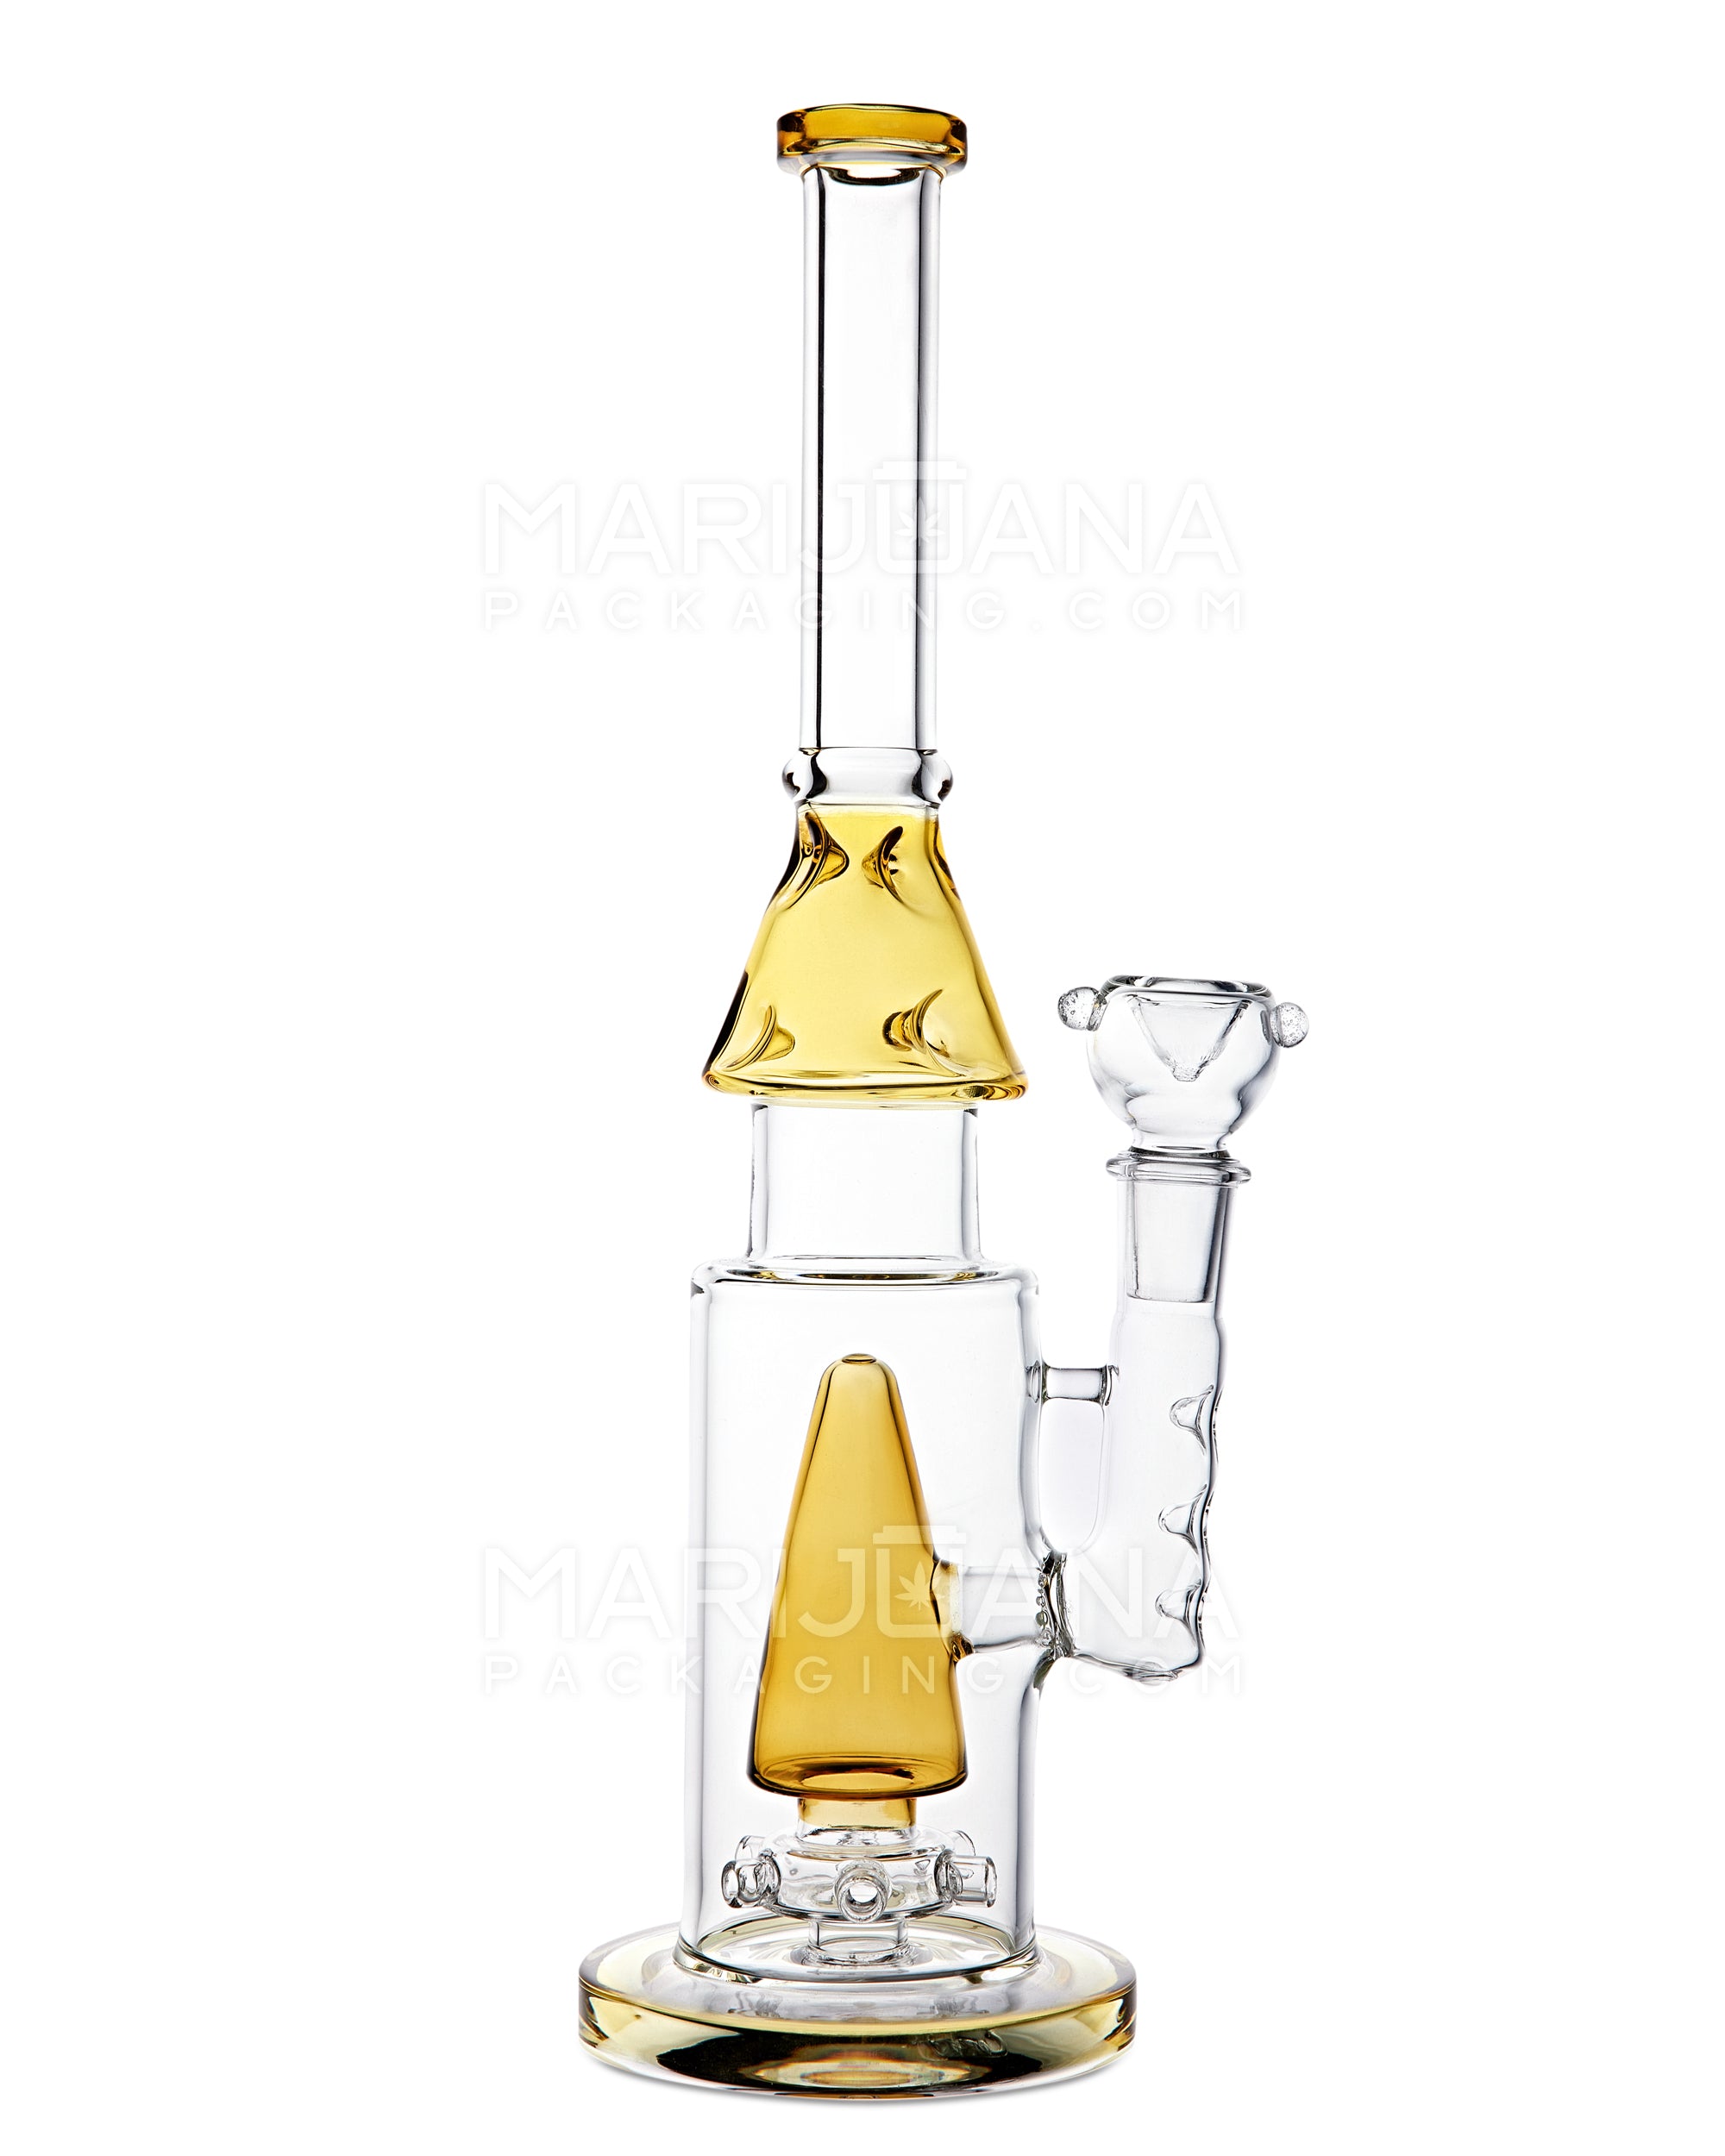 Straight Neck Showerhead Perc Glass Water Pipe w/ Ice Catcher & Thick Base | 15in Tall - 18mm Bowl - Yellow - 1